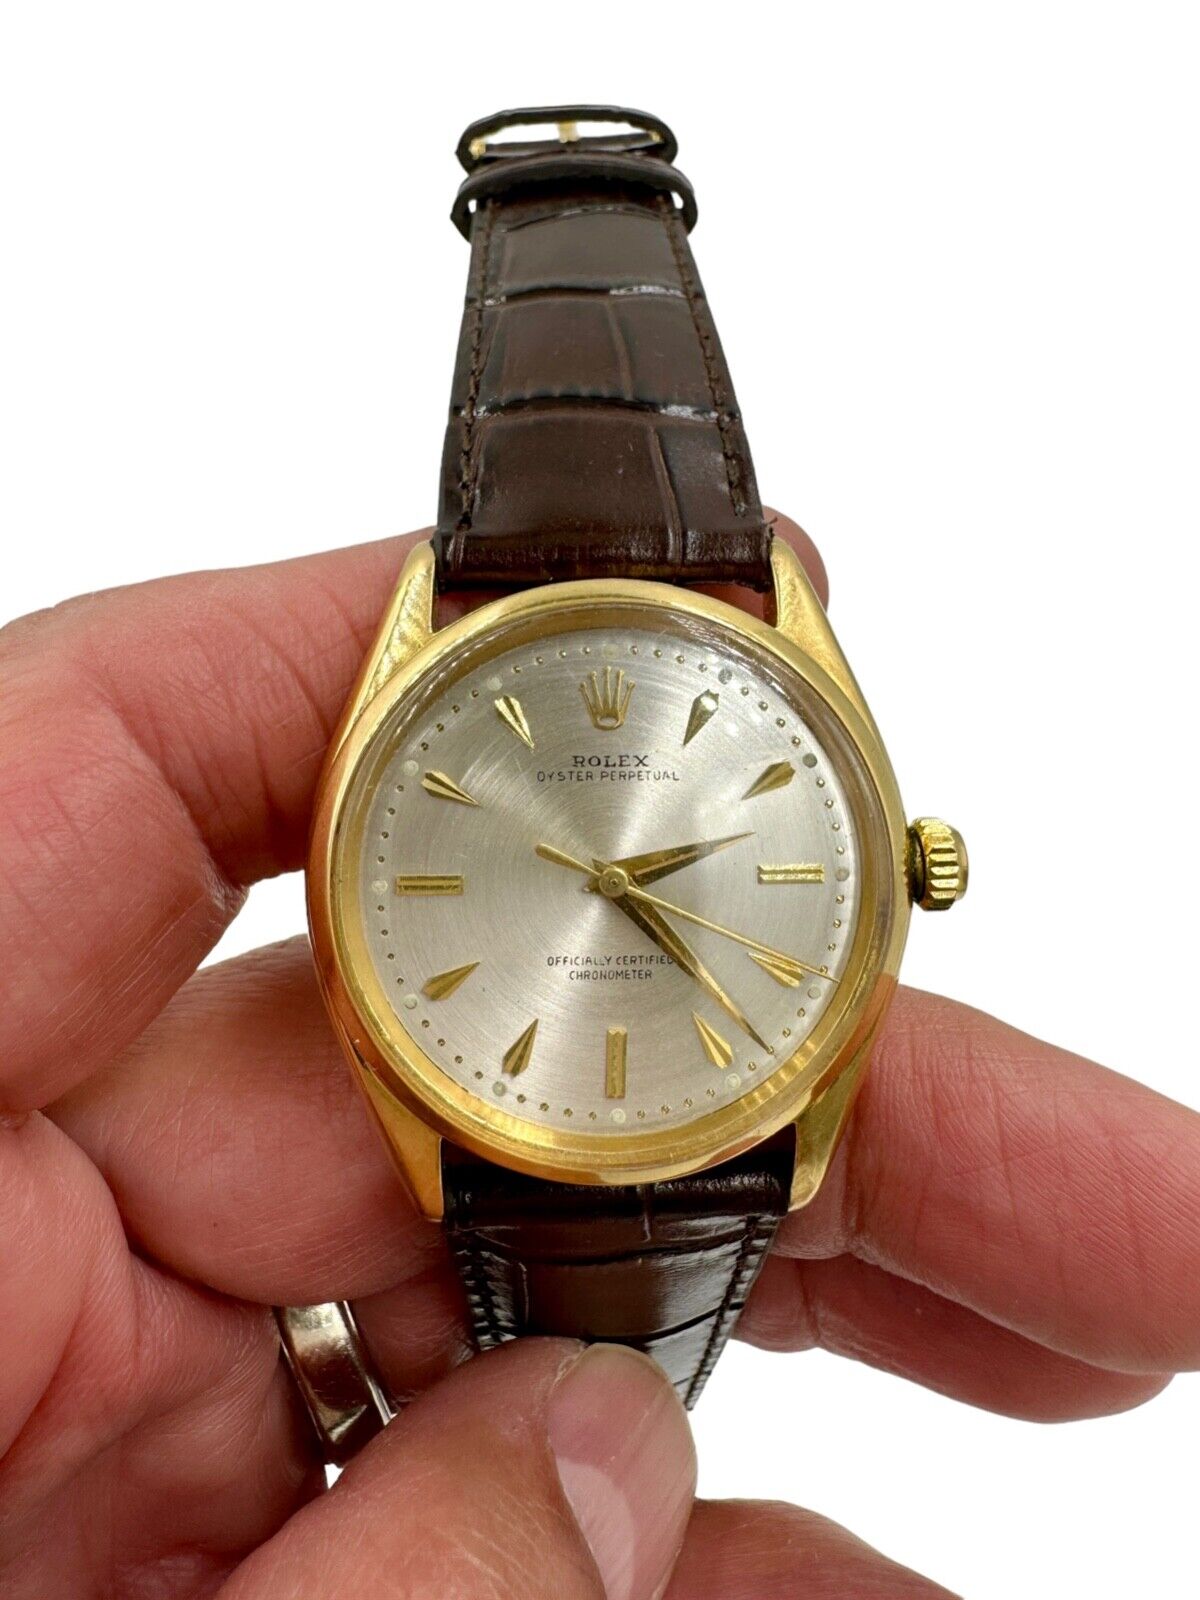 1967 Rolex Oyster Perpetual 18K Gold  34mm Watch Ref. 6564